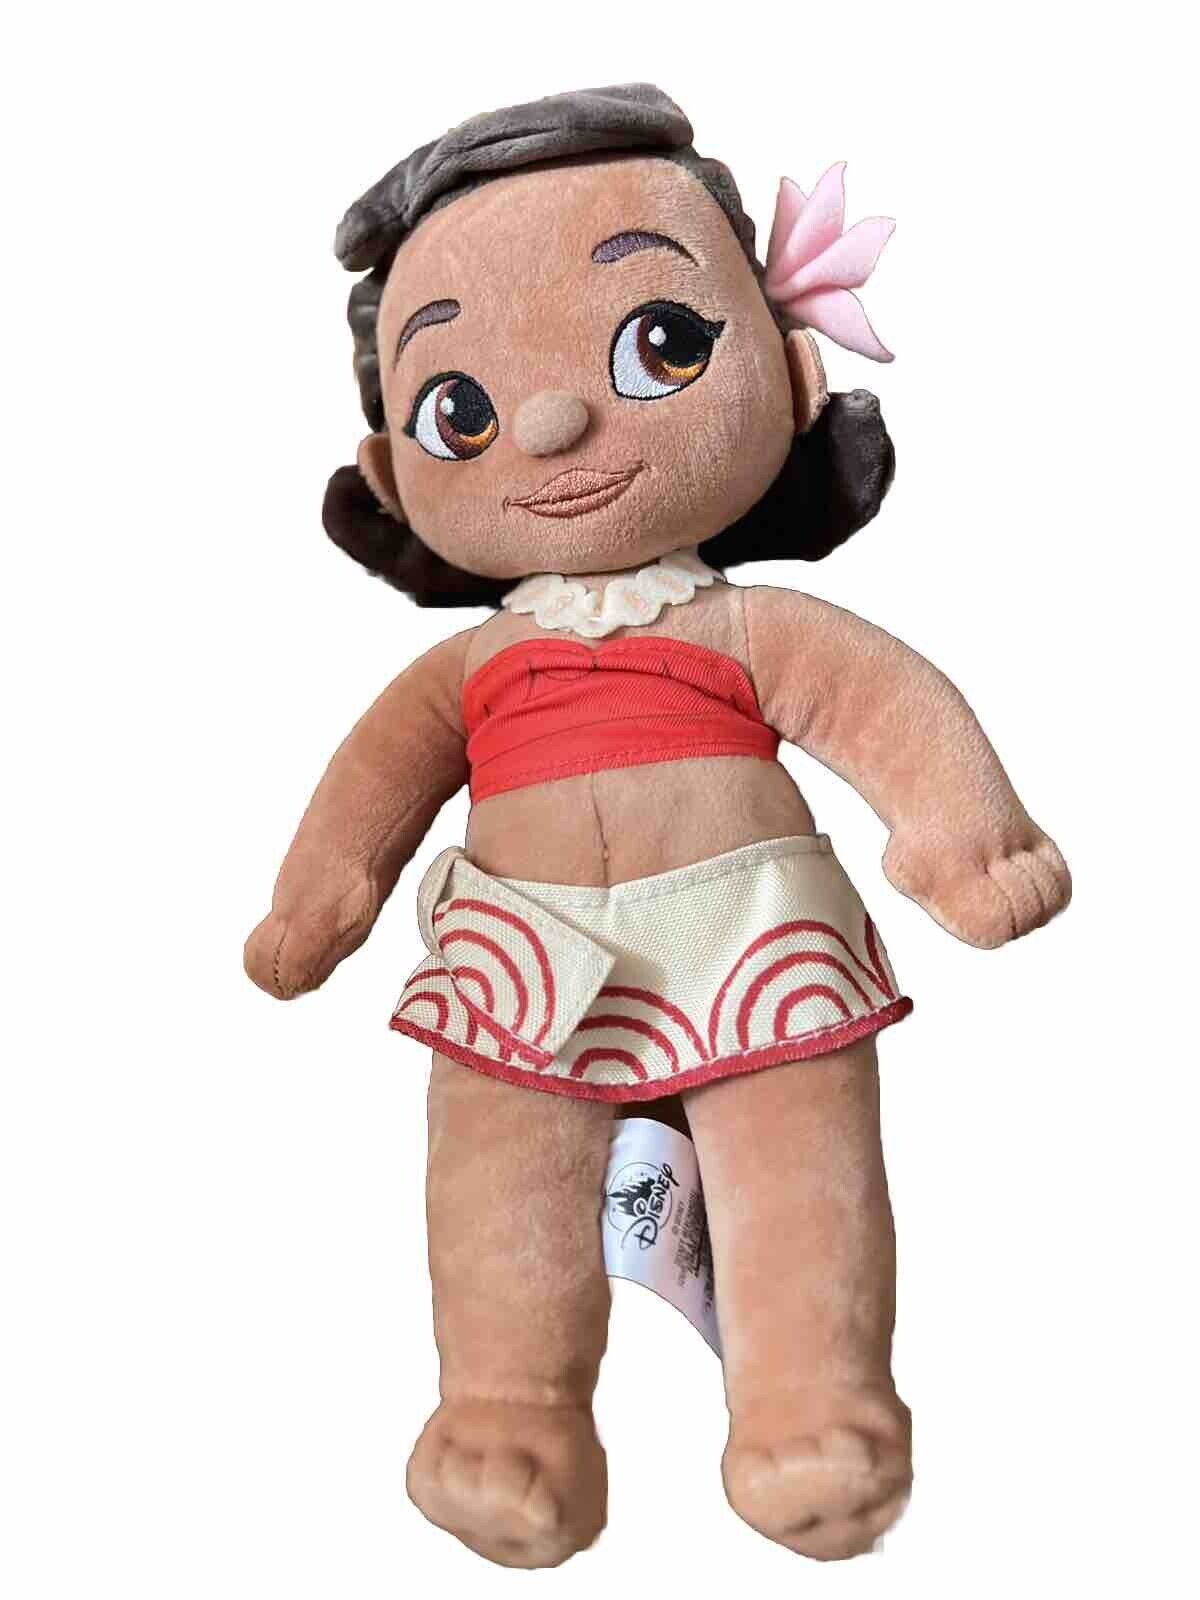 Moana Disney Store Exclusive  Toddler Baby 12” Soft Plush Princess Toy Doll